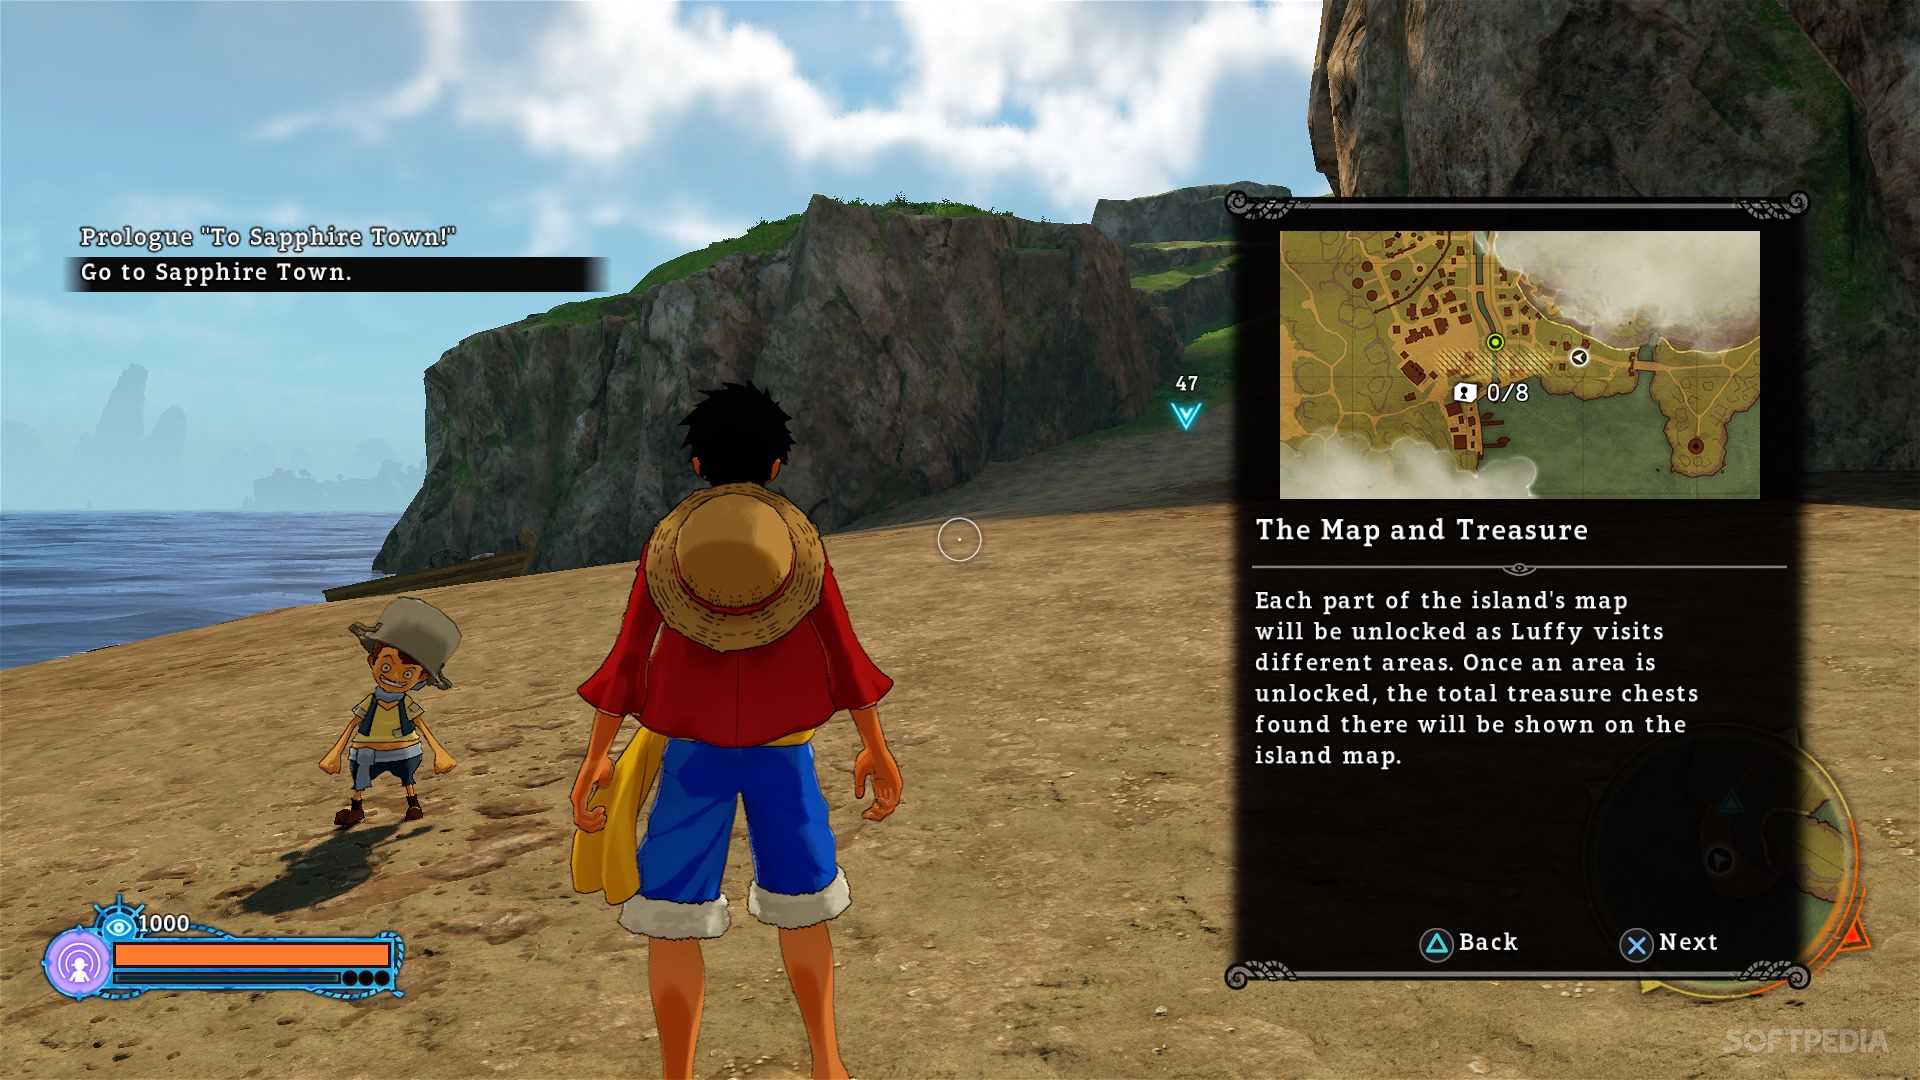 One Piece World Seeker Review Ps4